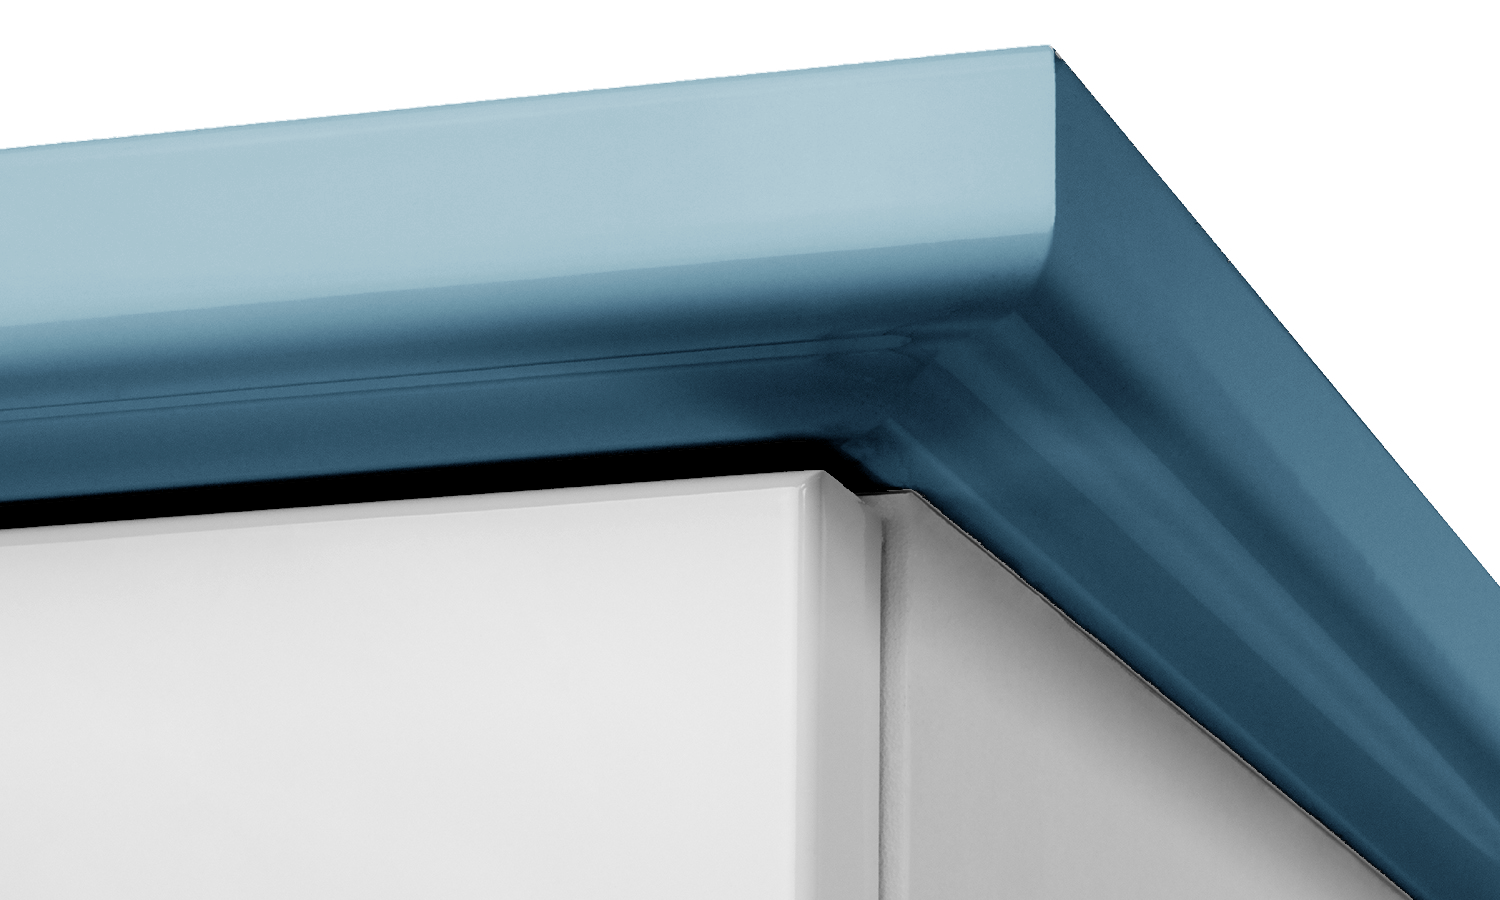 Square Bullnose Moulding in any colour